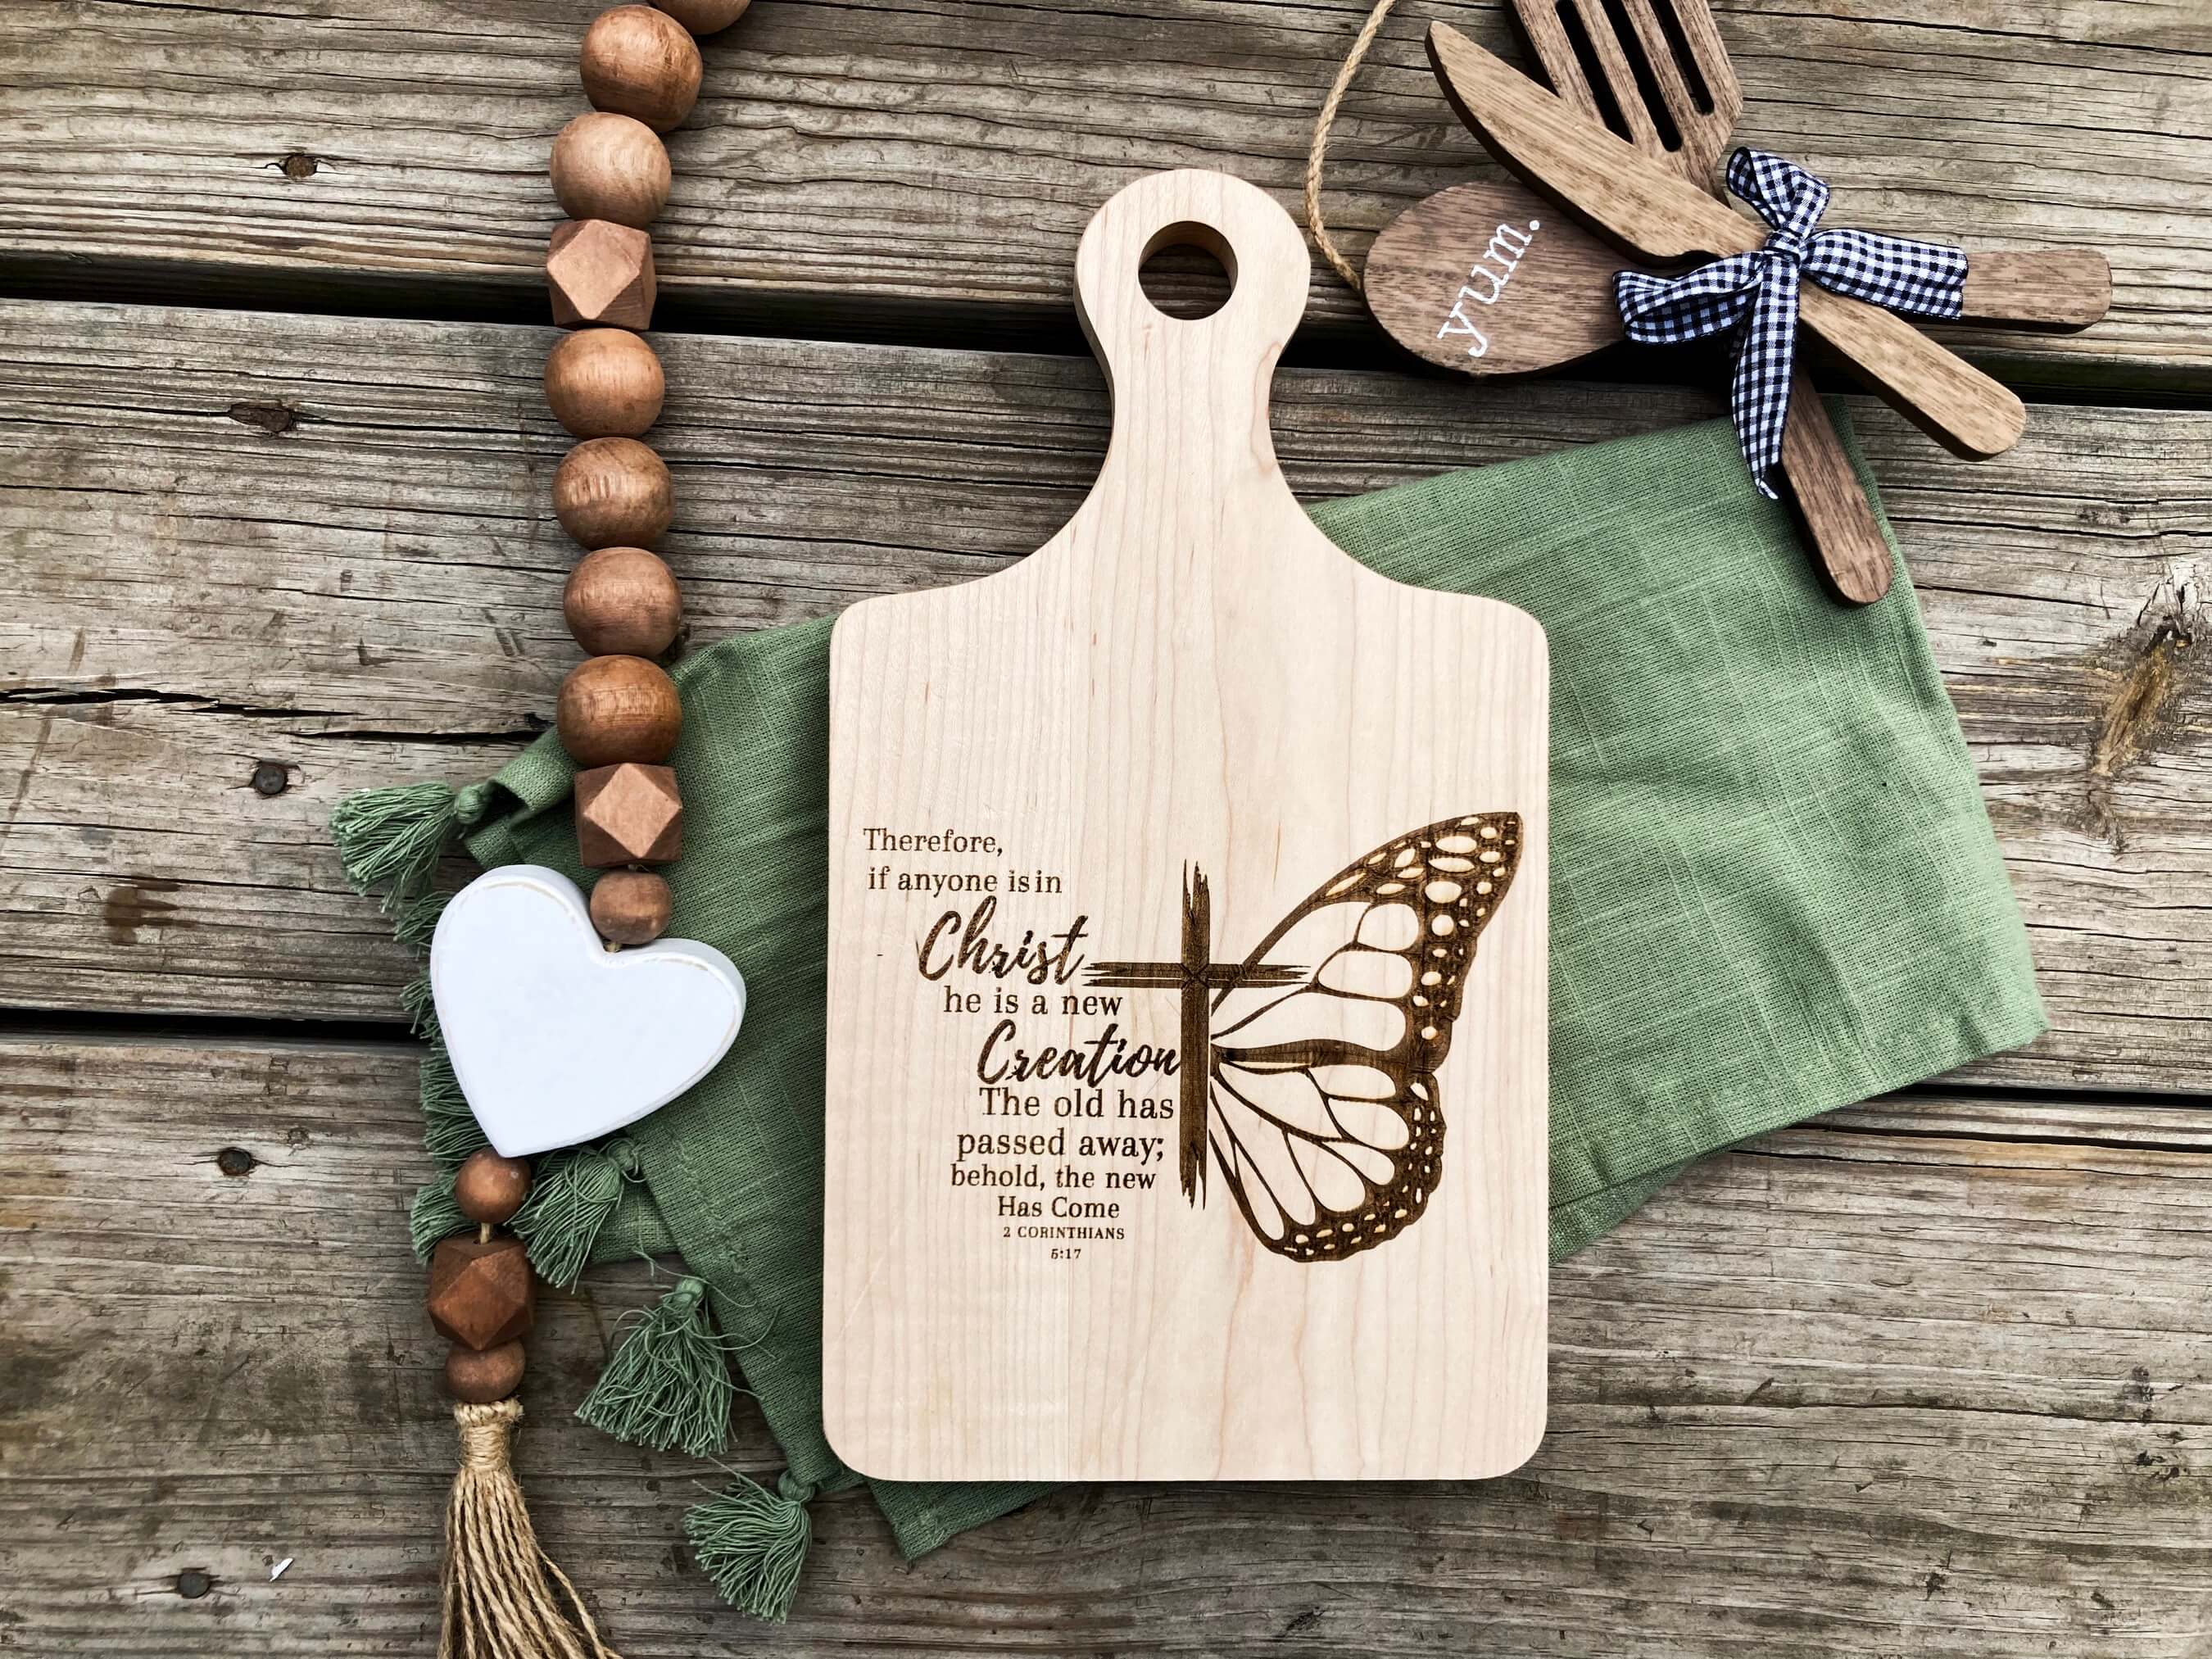 Christian Gift Idea. Decorate with Christian Decor with this Bible inspired cutting board. See more at SawyerCustomCrafts.com